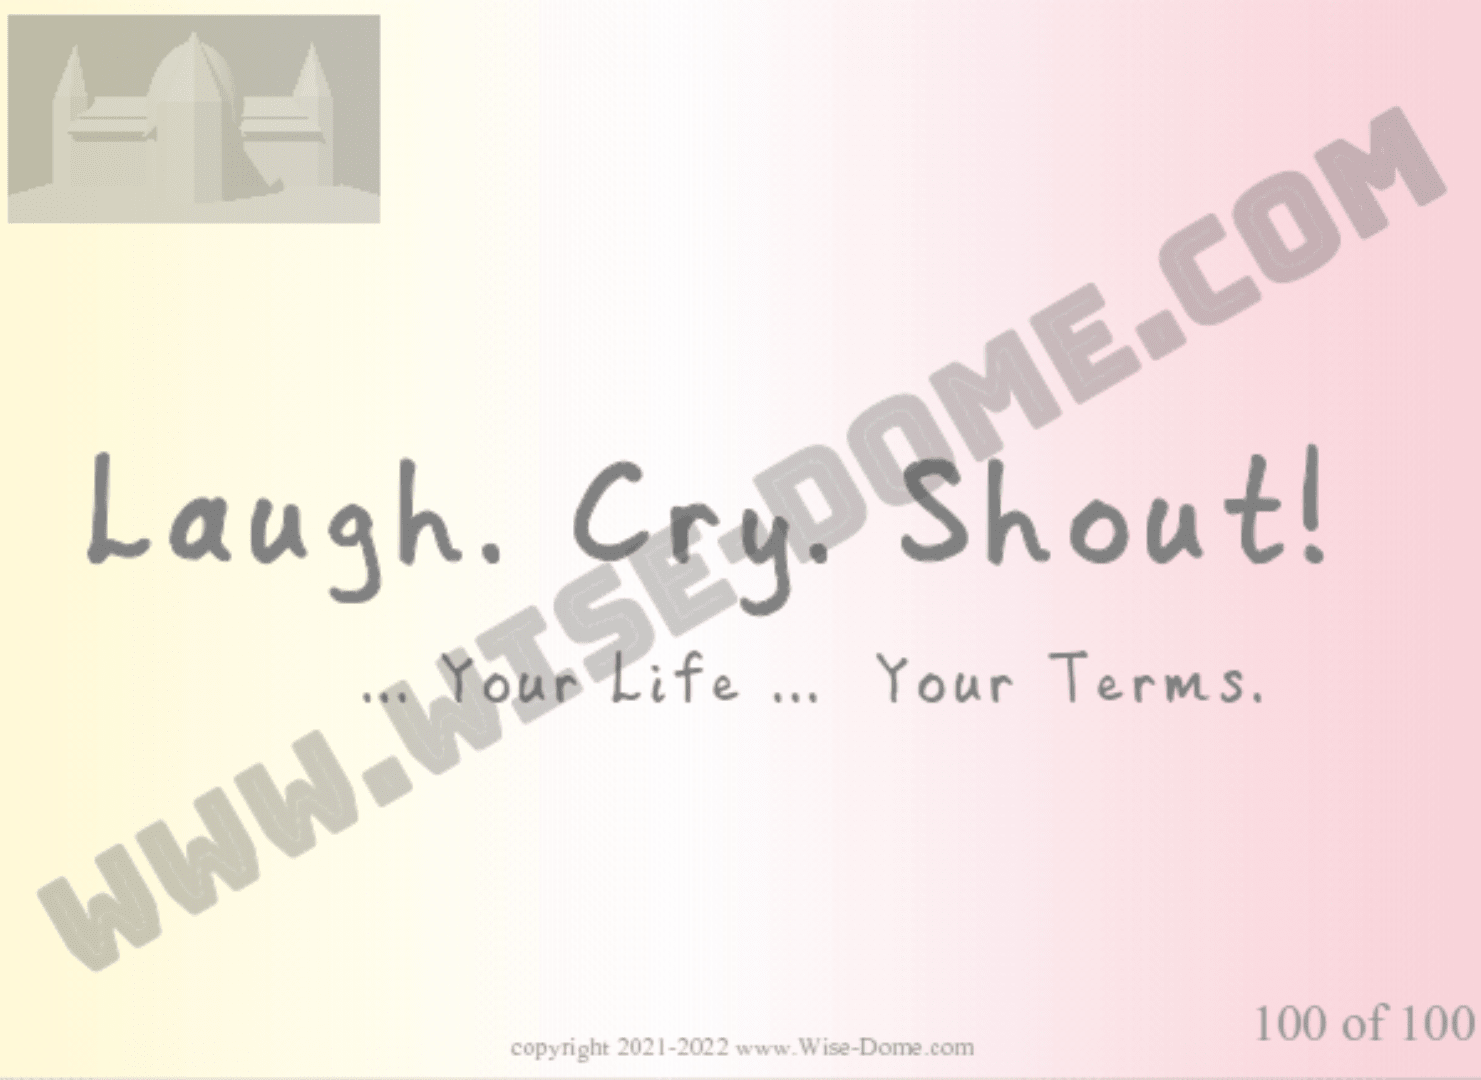 Harmony00003 -Laugh. Cry. Shout!